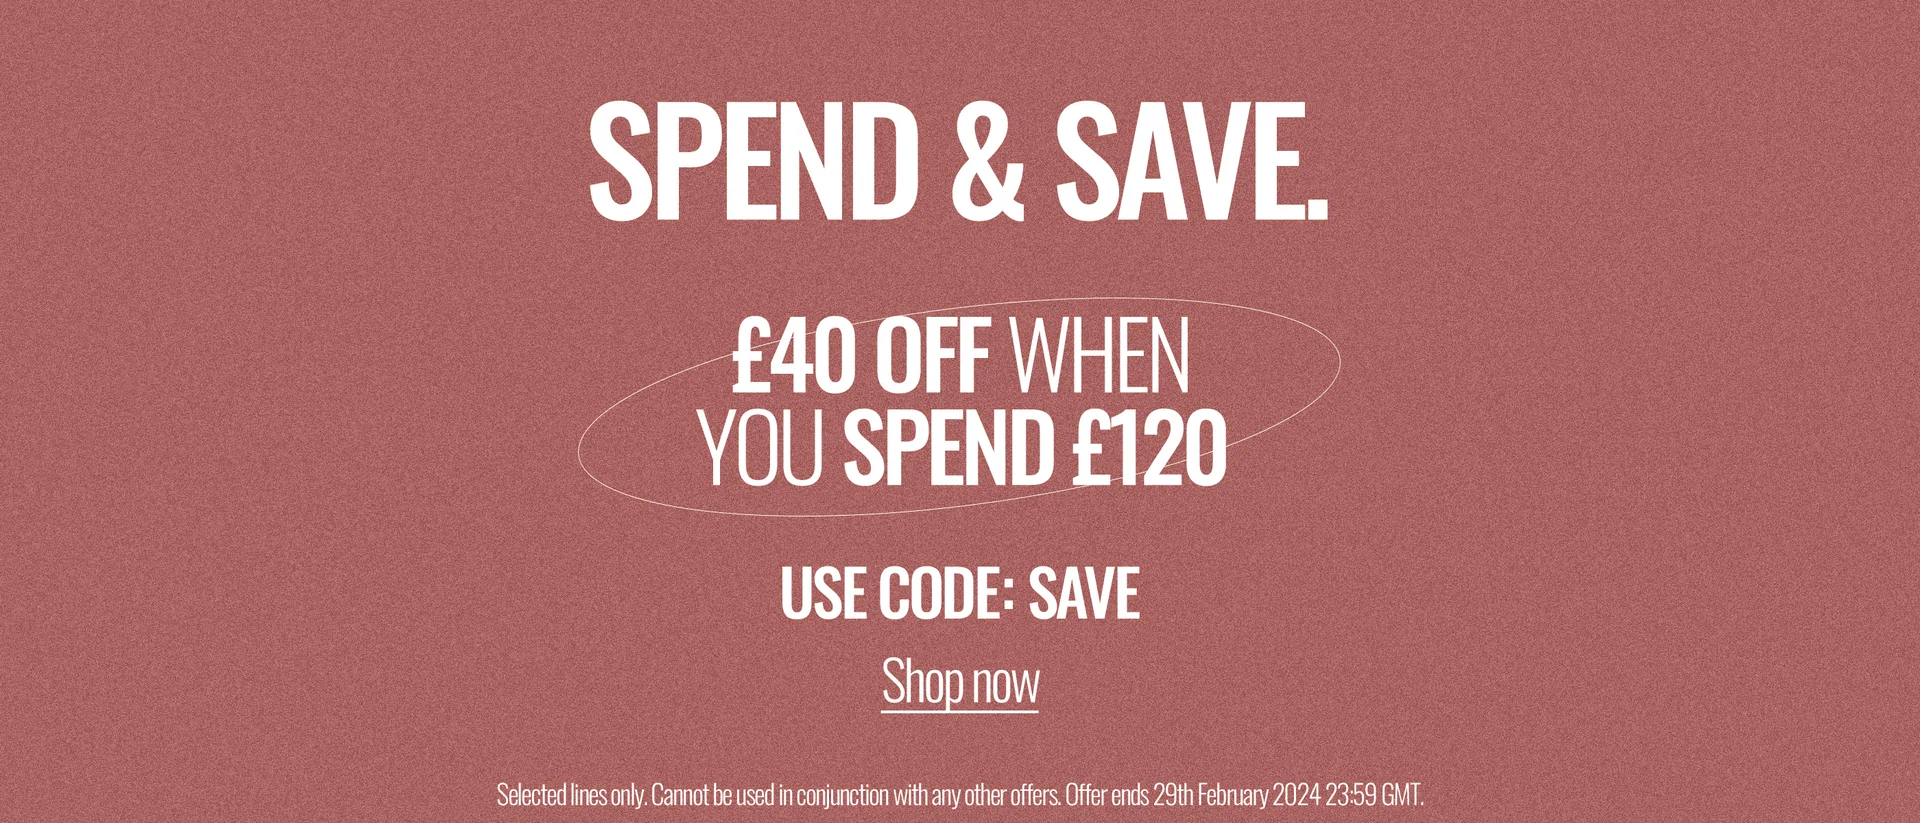 Spend & Save. £40 off when you spend £120. Use Code: SAVE. Shop Now. Selected Line Only. Cannot be used in conjunction with any other offers. Offer ends 29th February 2024 23:59 GMT.